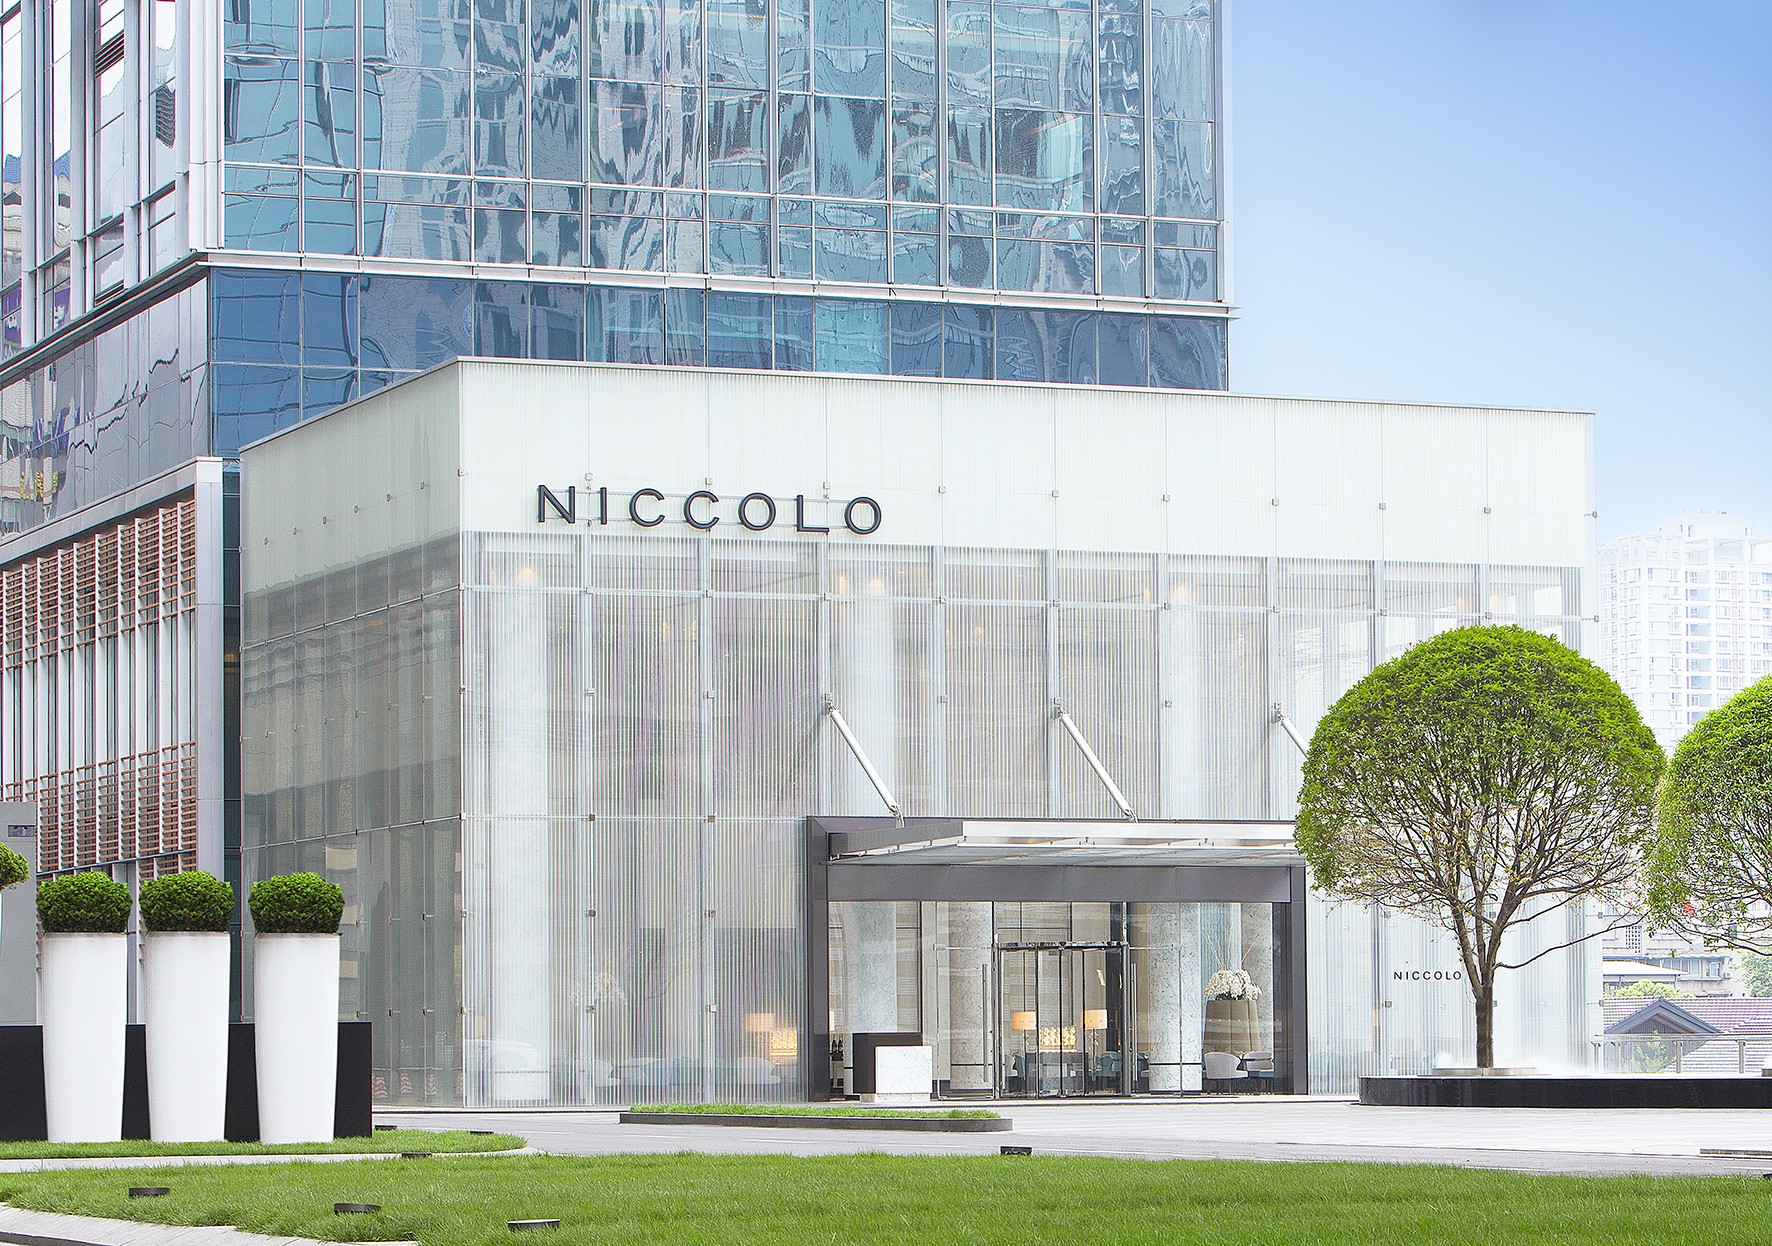 Niccolo Chengdu appeals to business and leisure travellers as well as families.